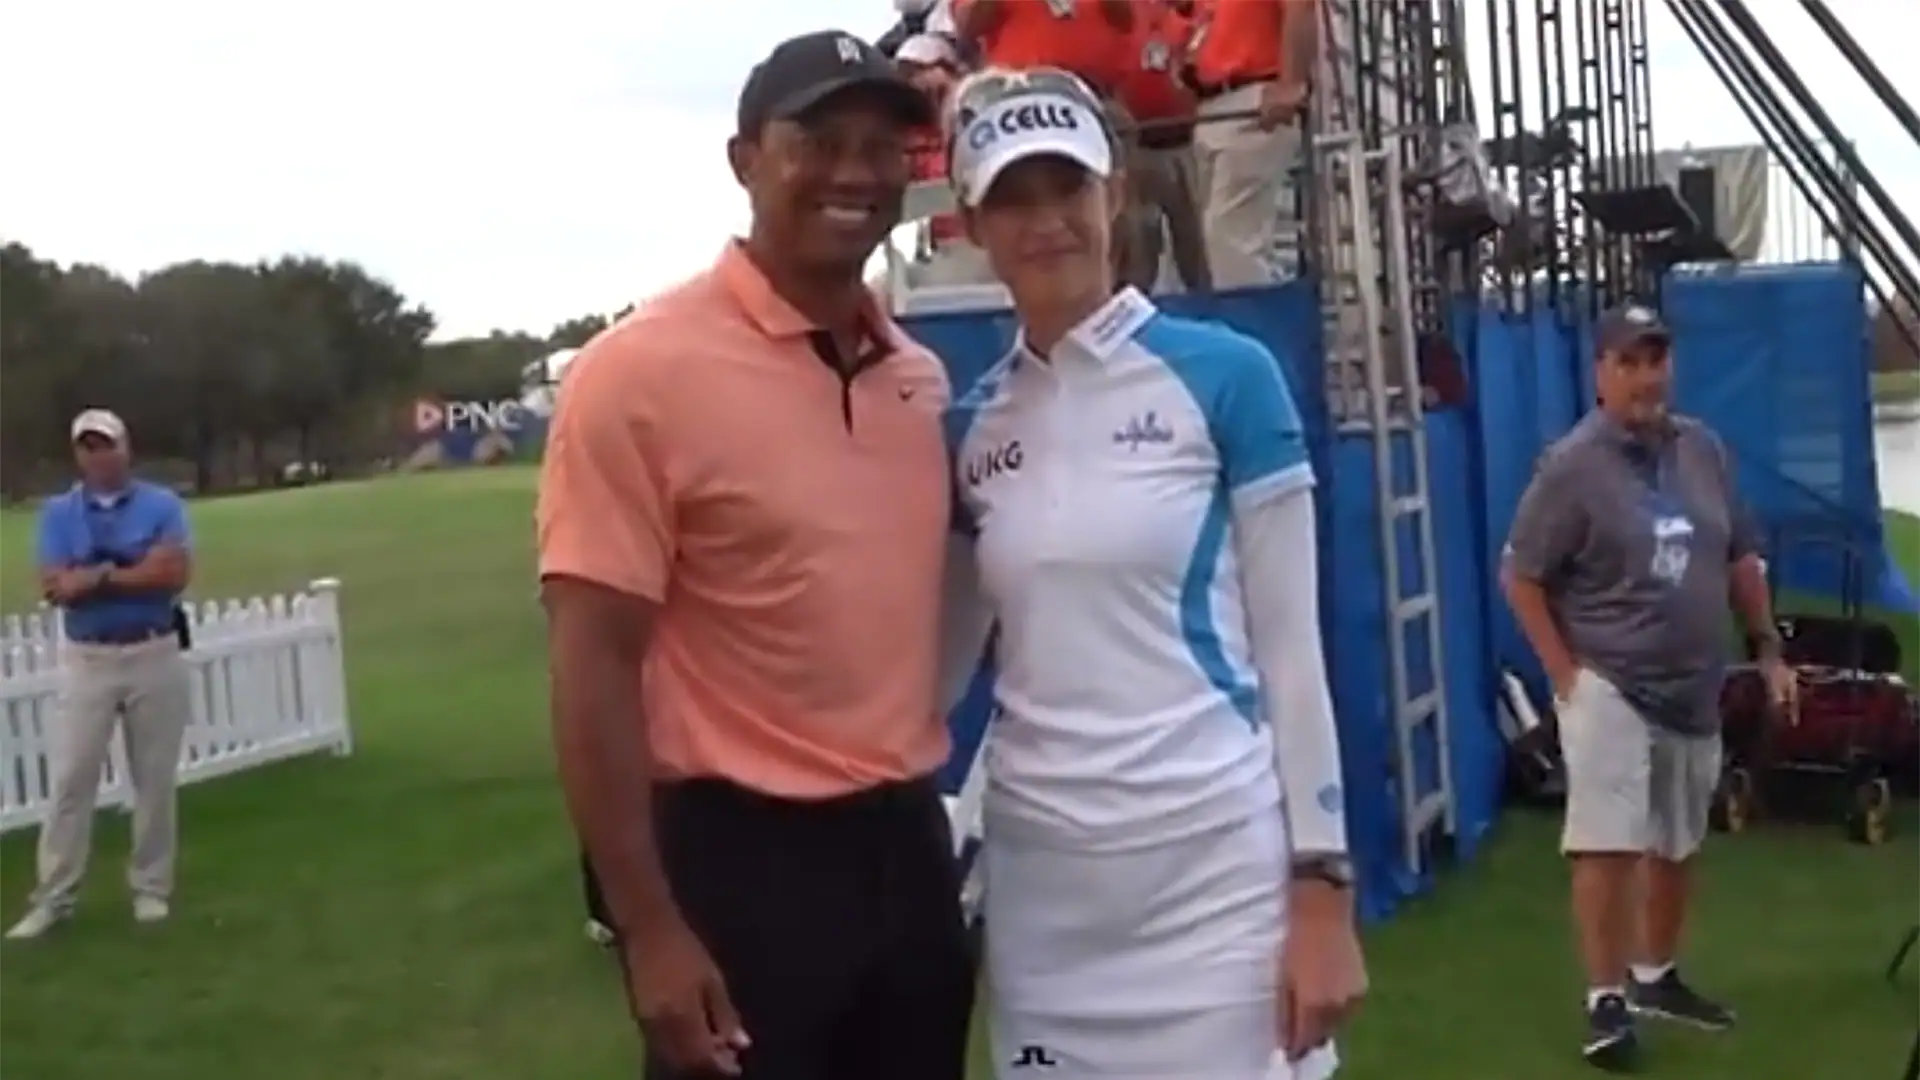 Nelly Korda gets her photo with Tiger Woods as Tiger praises Nelly